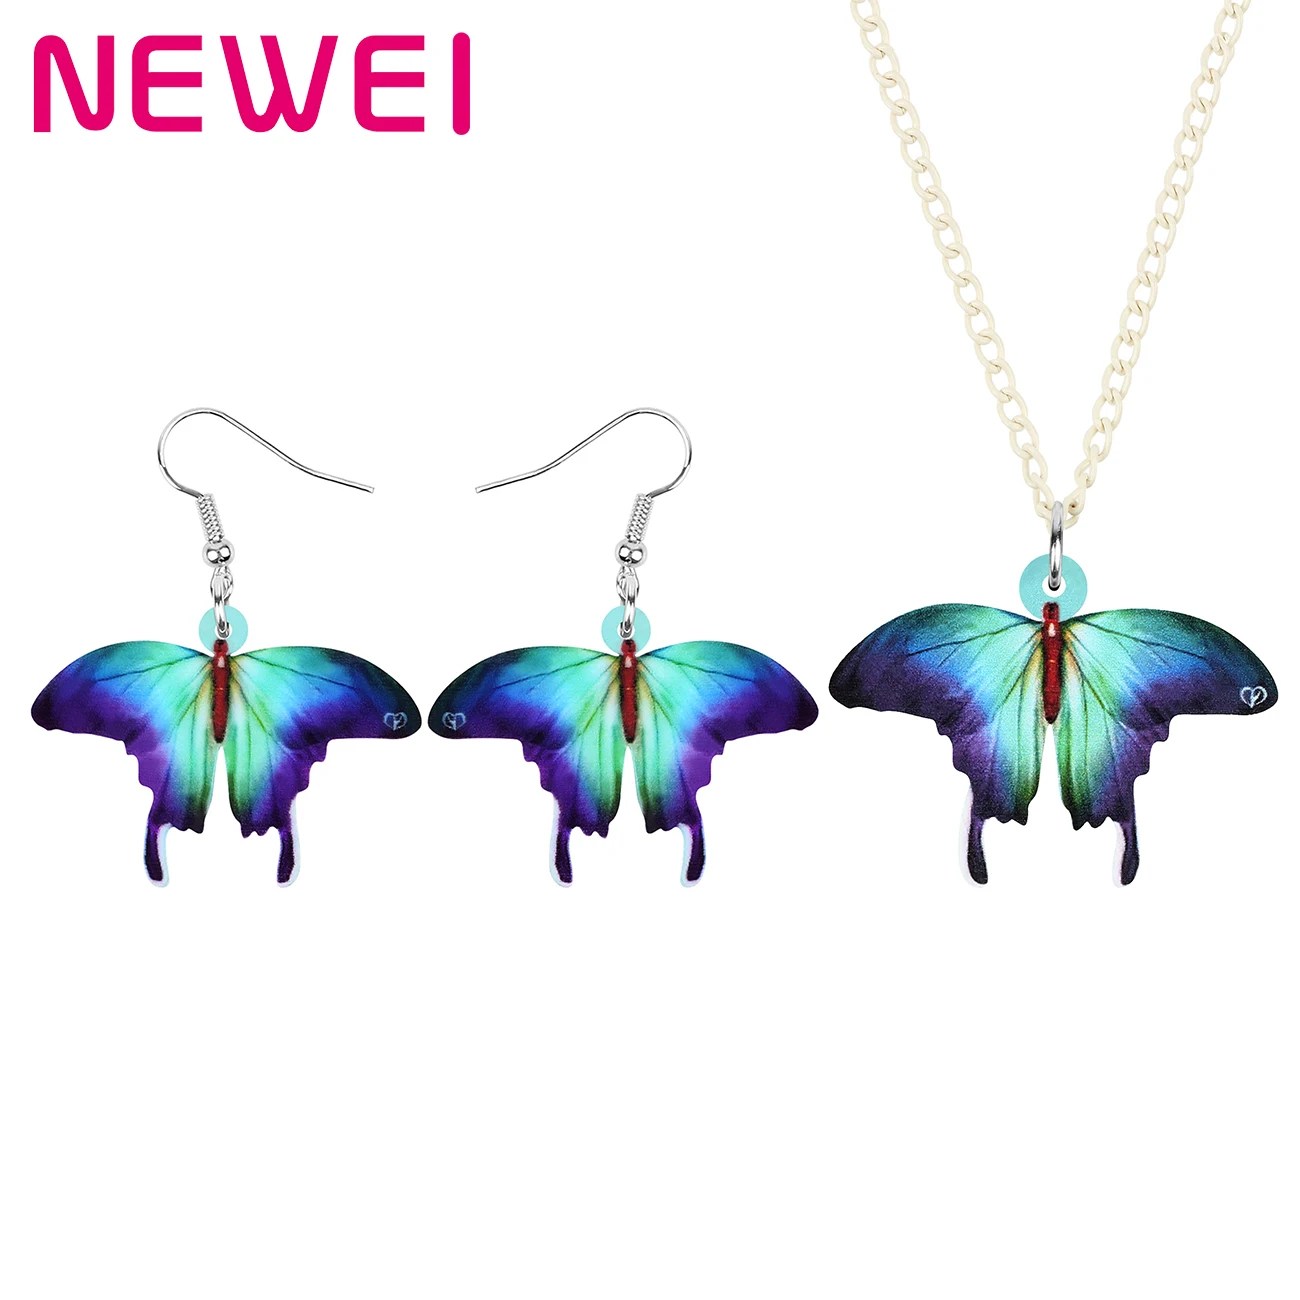 

Newei Acrylic Blue Morpho Butterfly Jewelry Sets Animal Insect Necklace Earrings For Women Teens Girls Novelty Festival Gifts